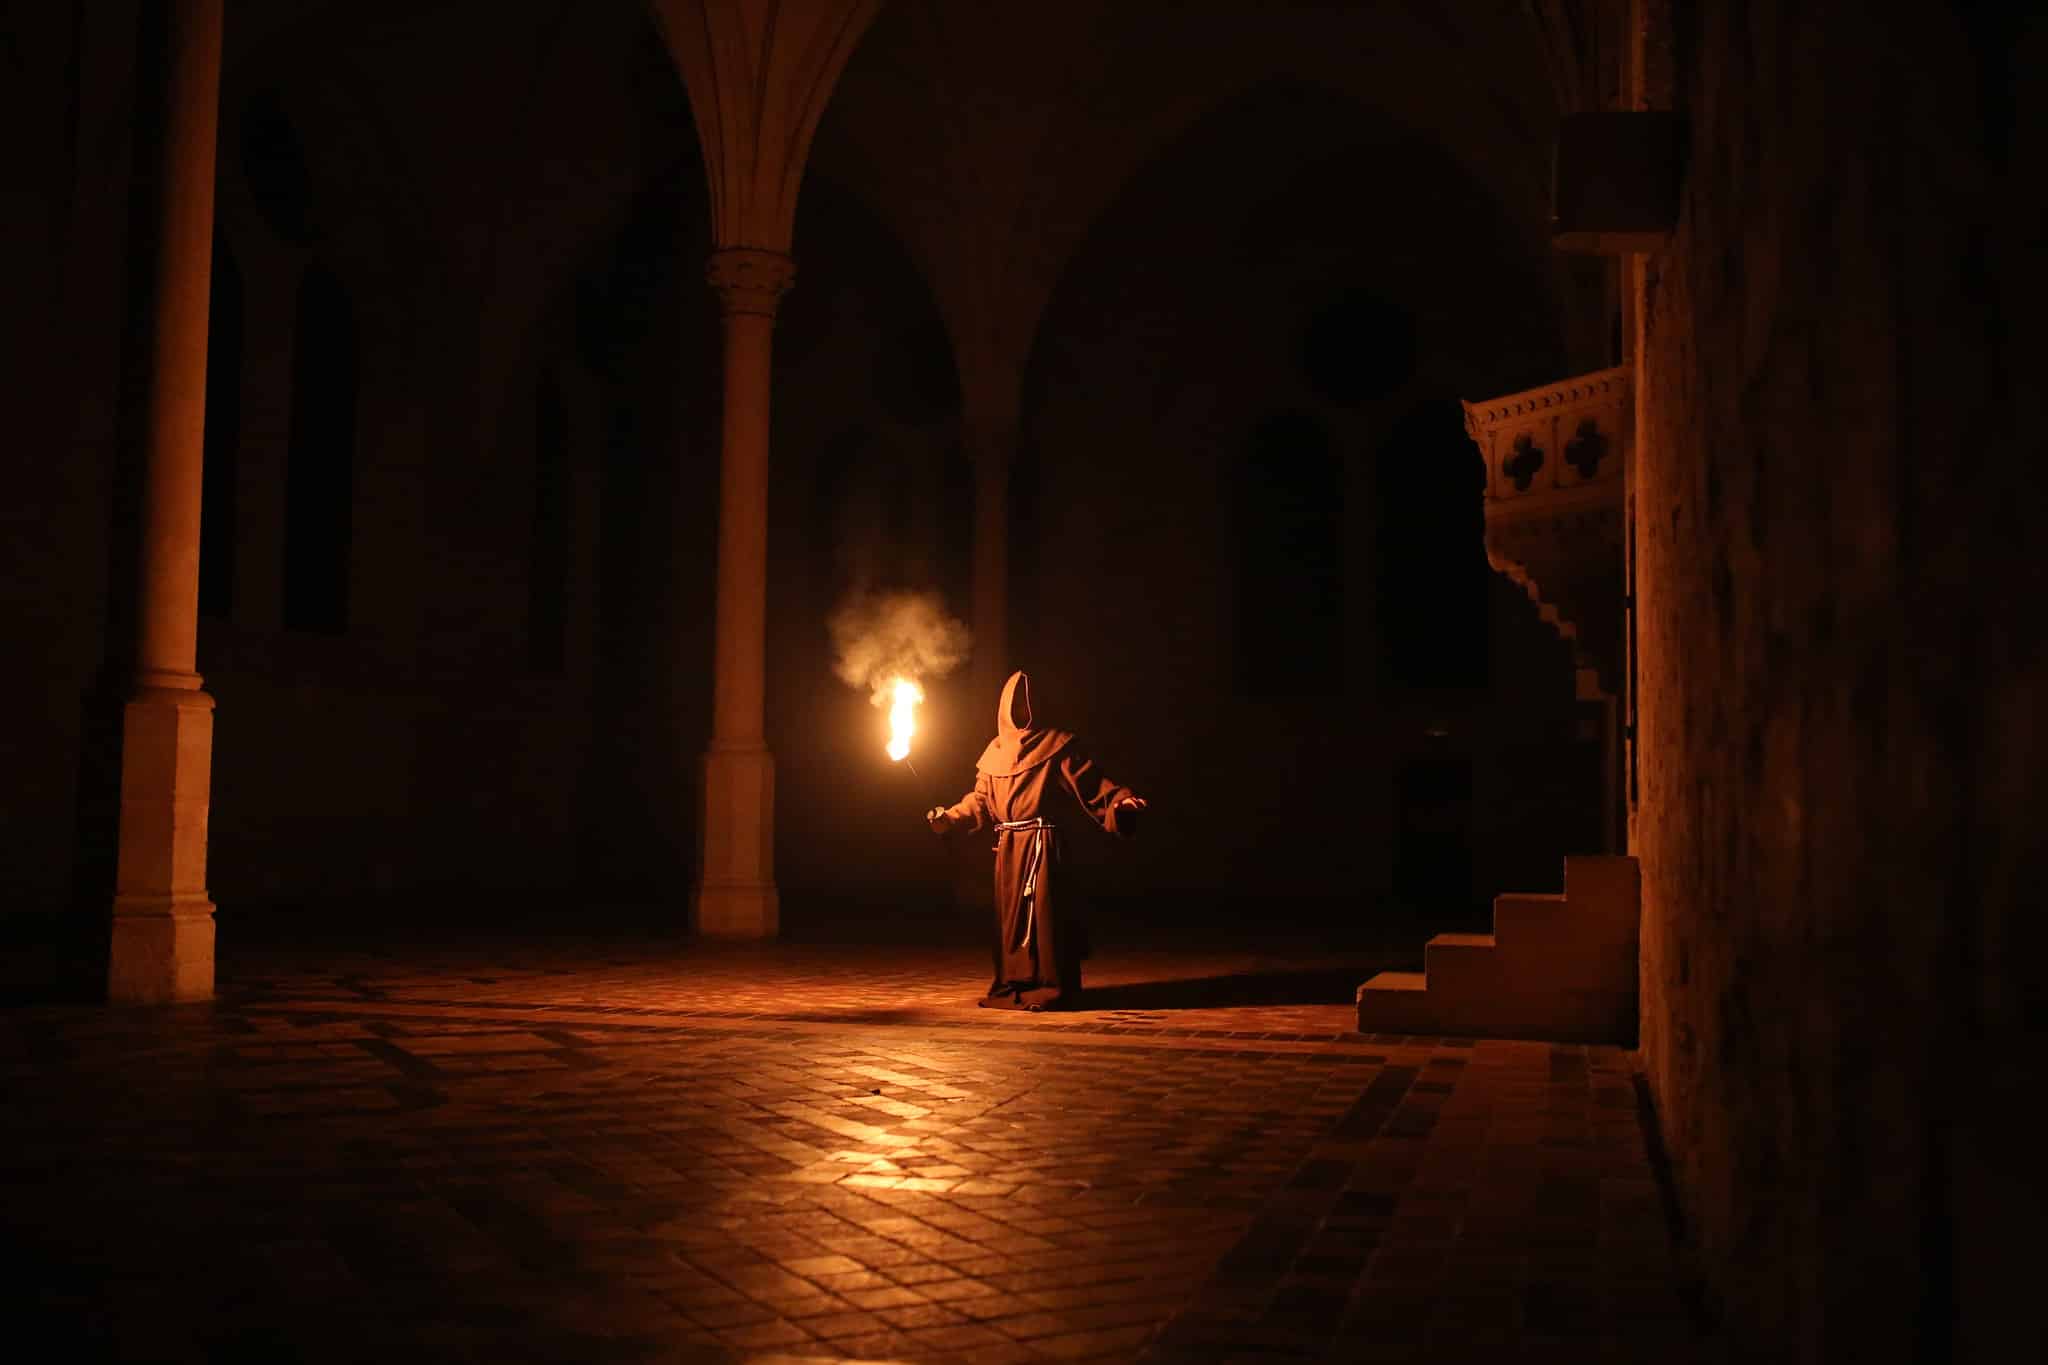 acteur-moine-torche-lueur-bougies-refectoire-abbaye-de-royaumont-teaser-video-soiree-insolite-the-last-monastery-5-ans-wato-agence-wato-we-are-the-oracle-evenementiel-events